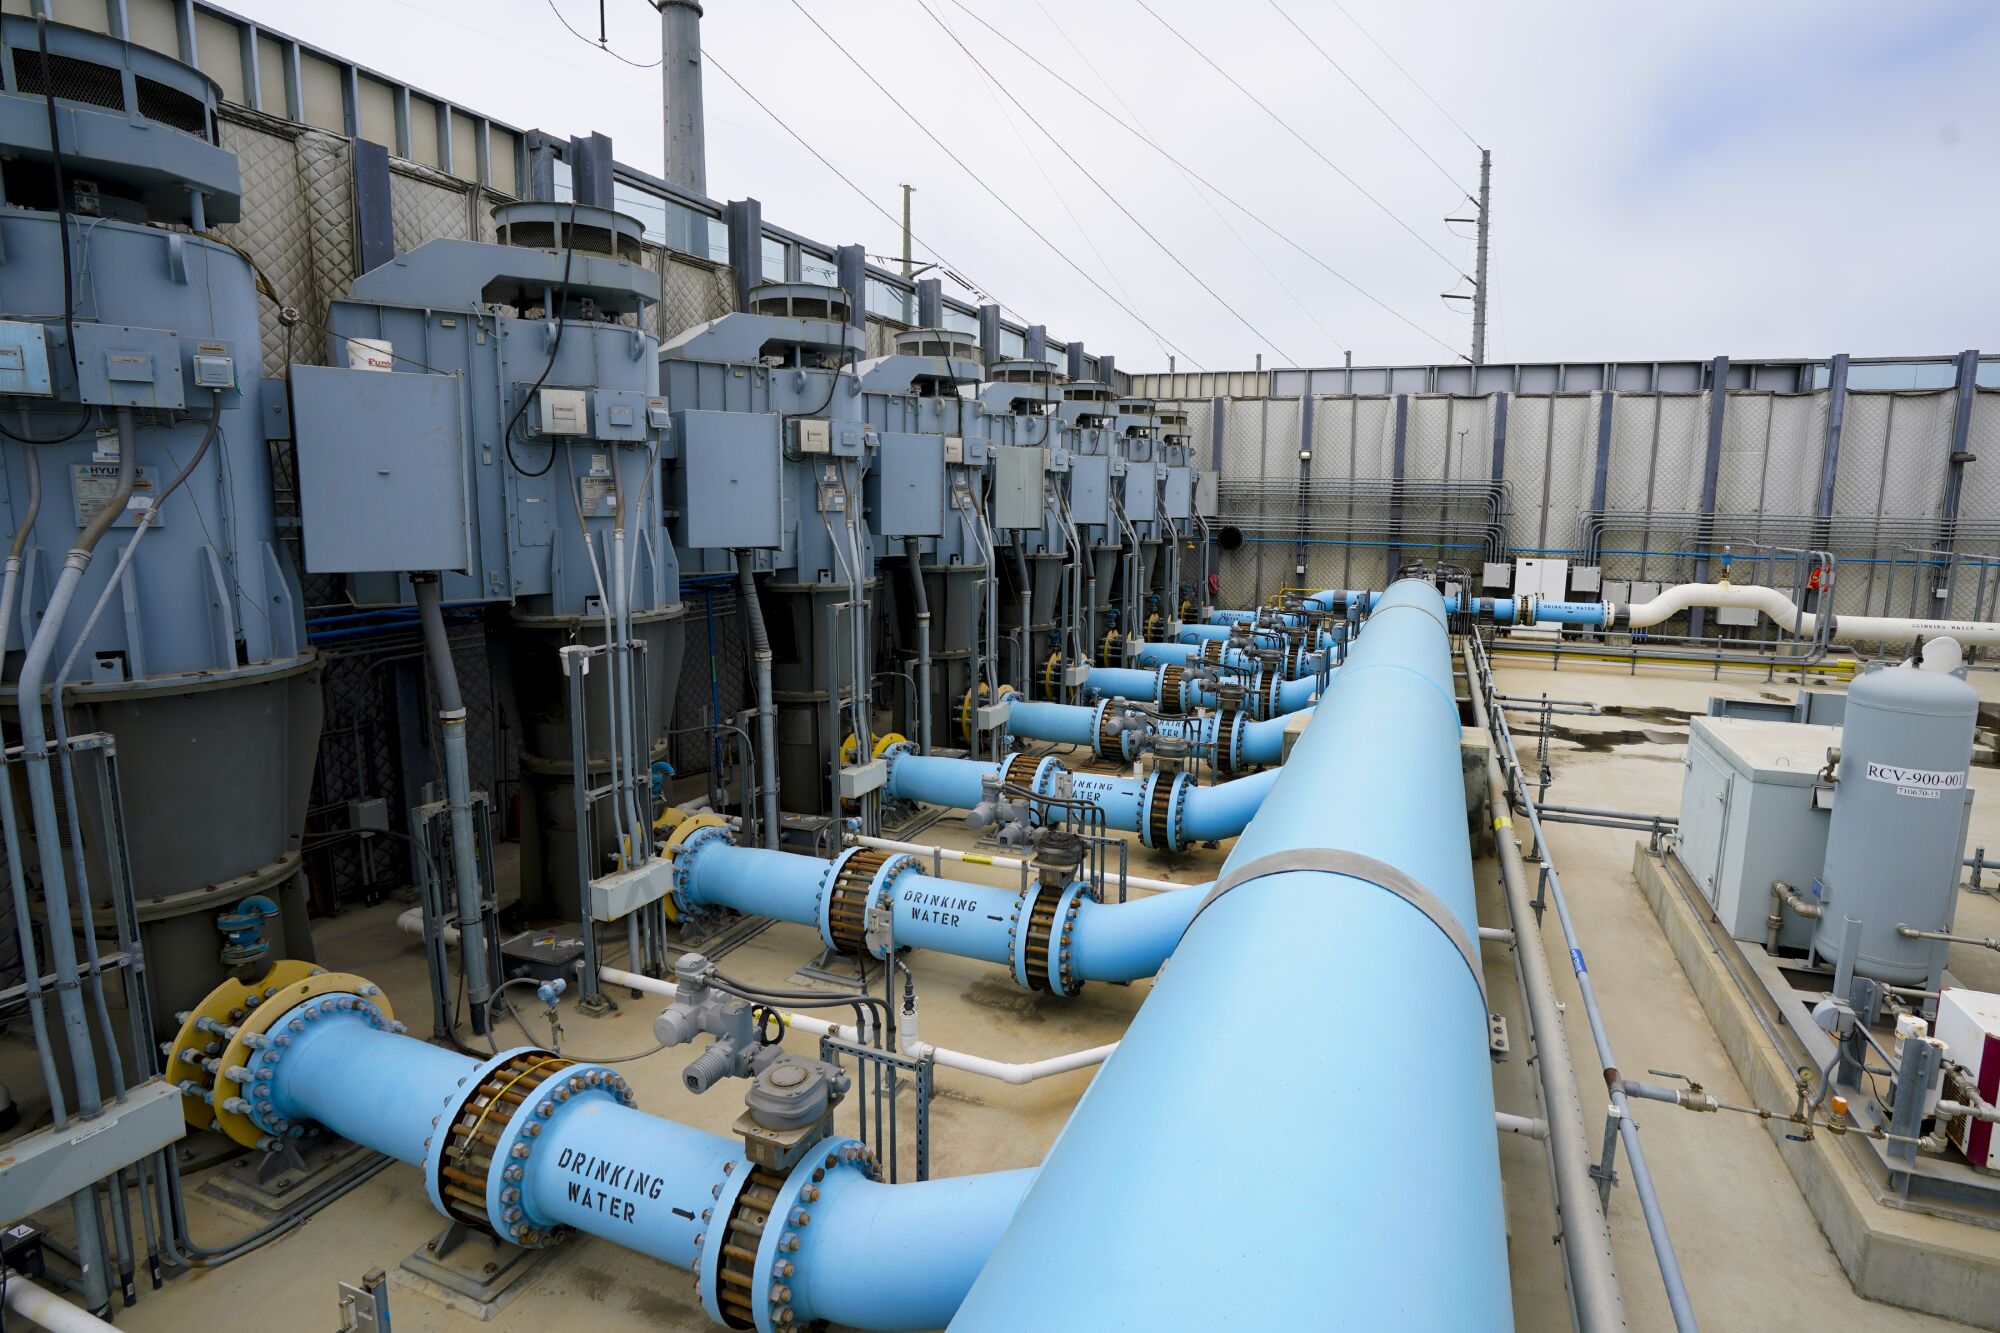 June 7, 2022 at the Carlsbad Desalination Plant, large pipes pump drinkable water 10 miles east.